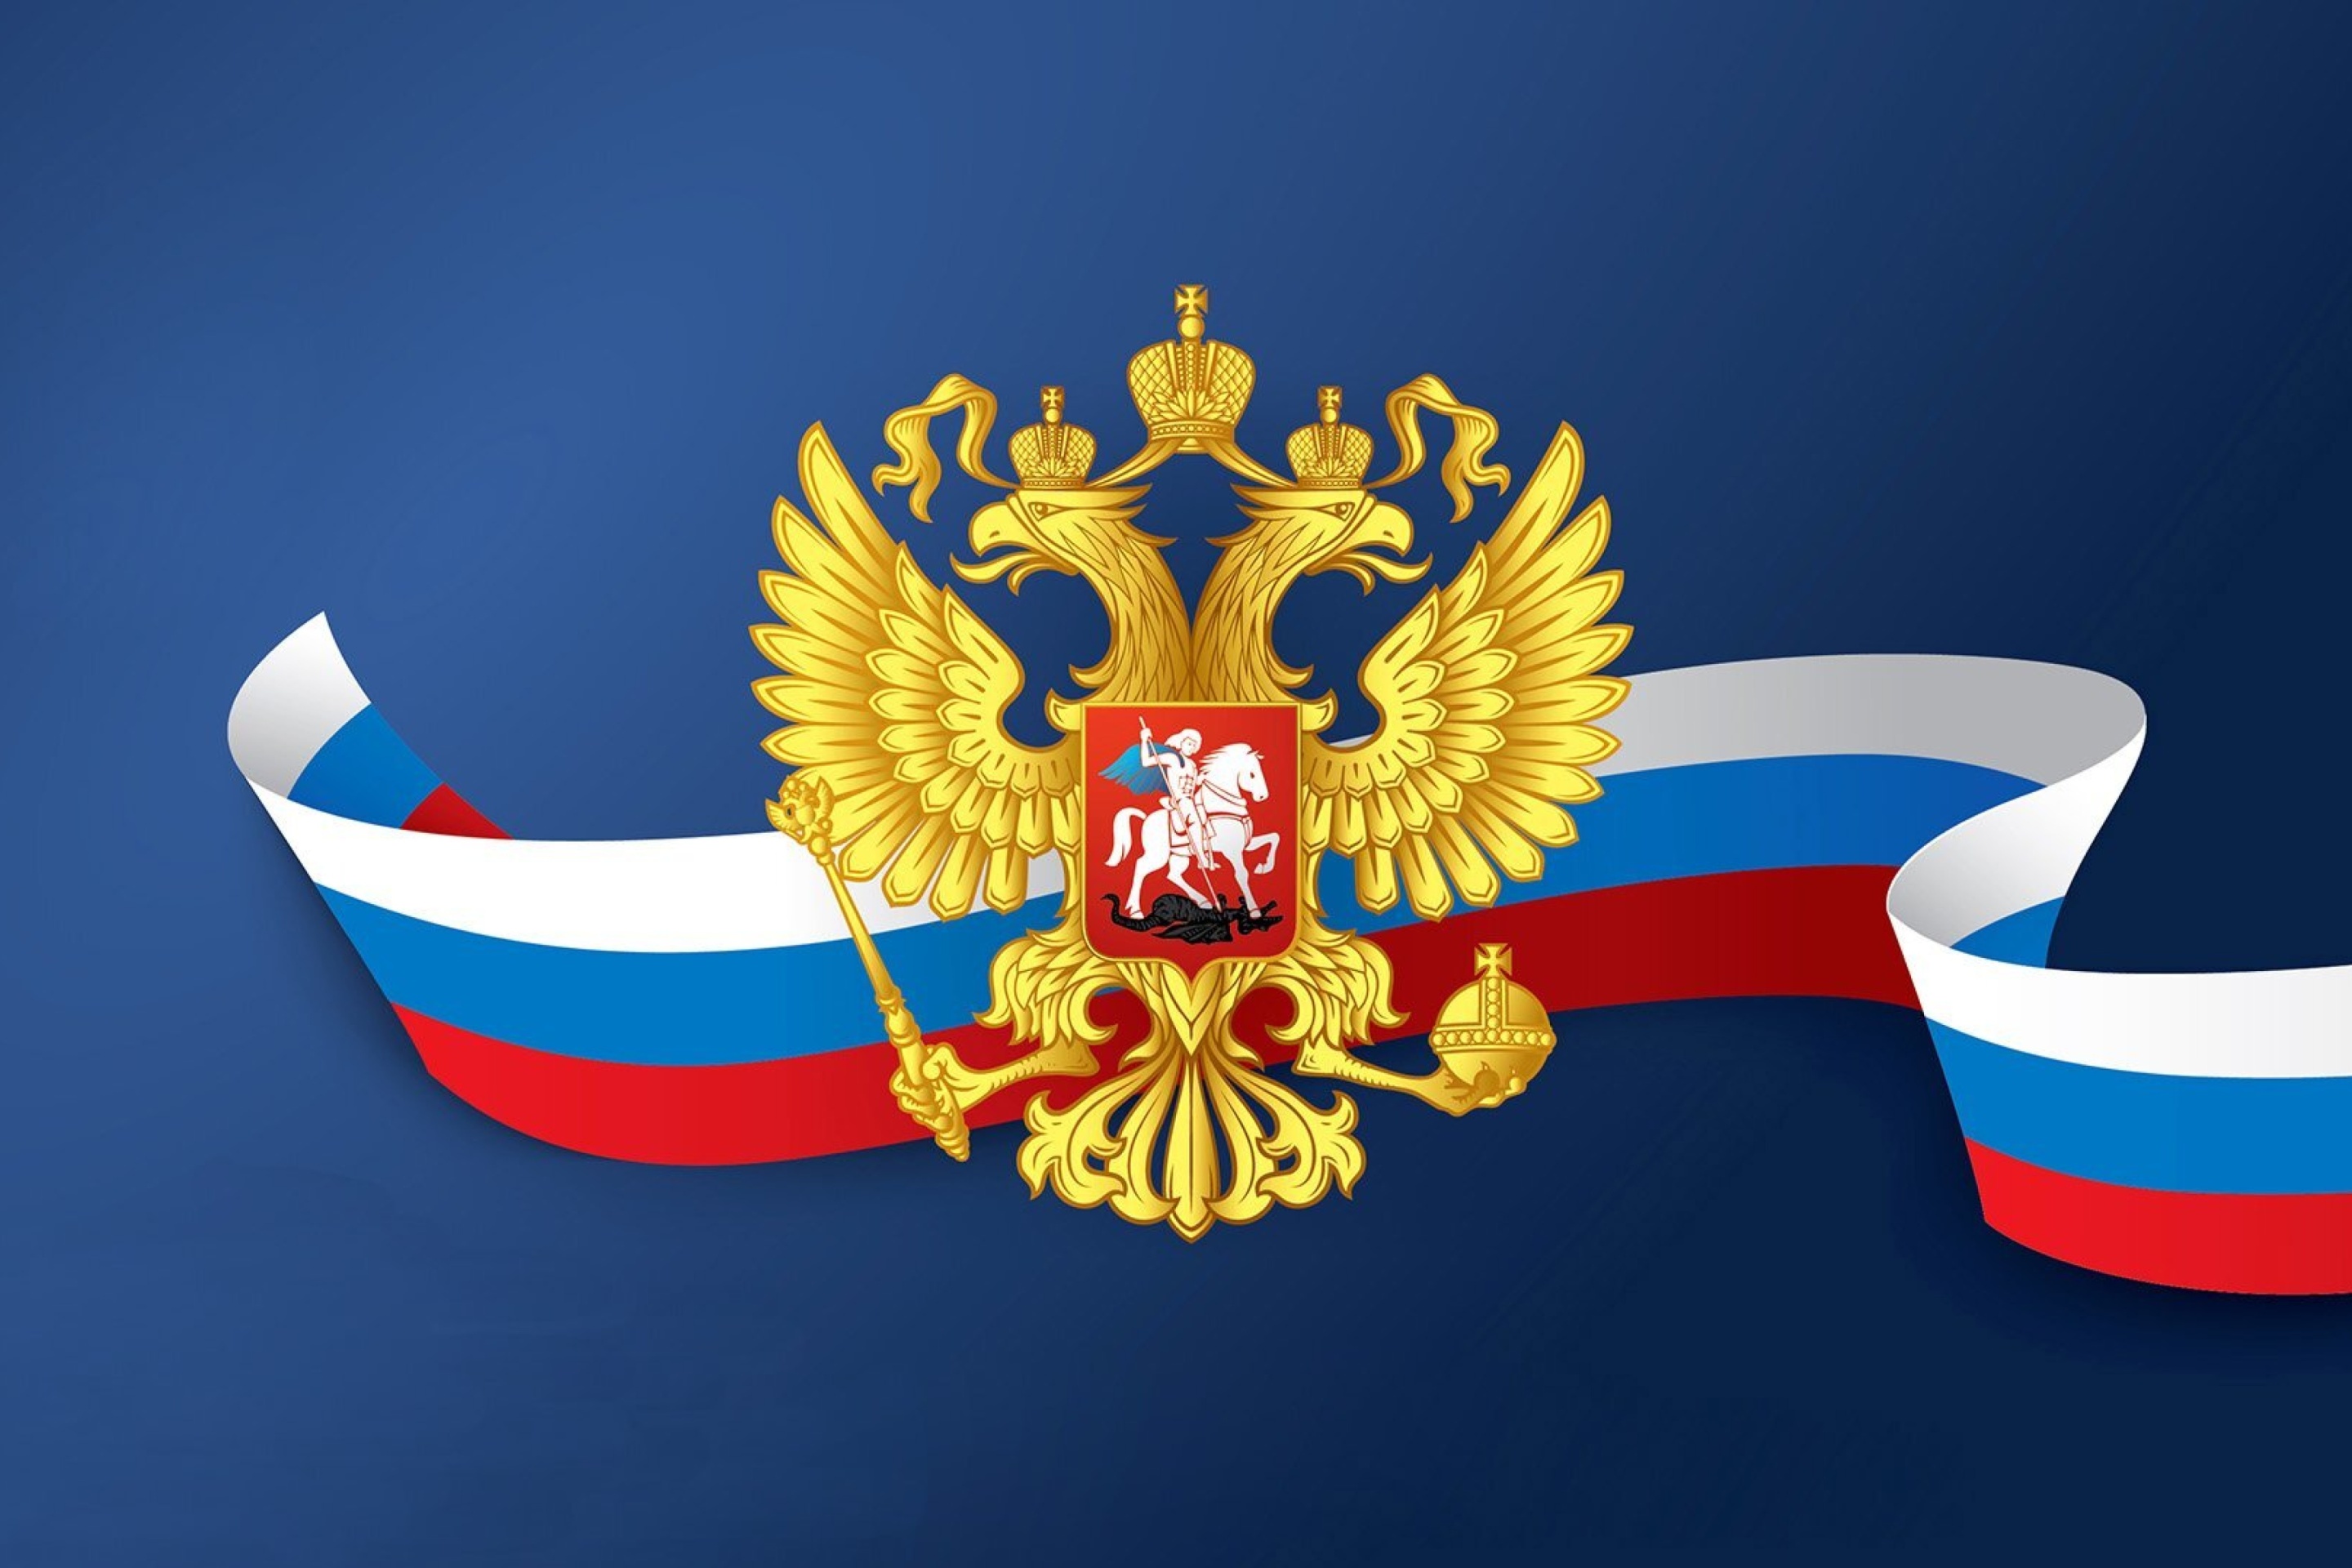 Das Russian coat of arms and flag Wallpaper 2880x1920